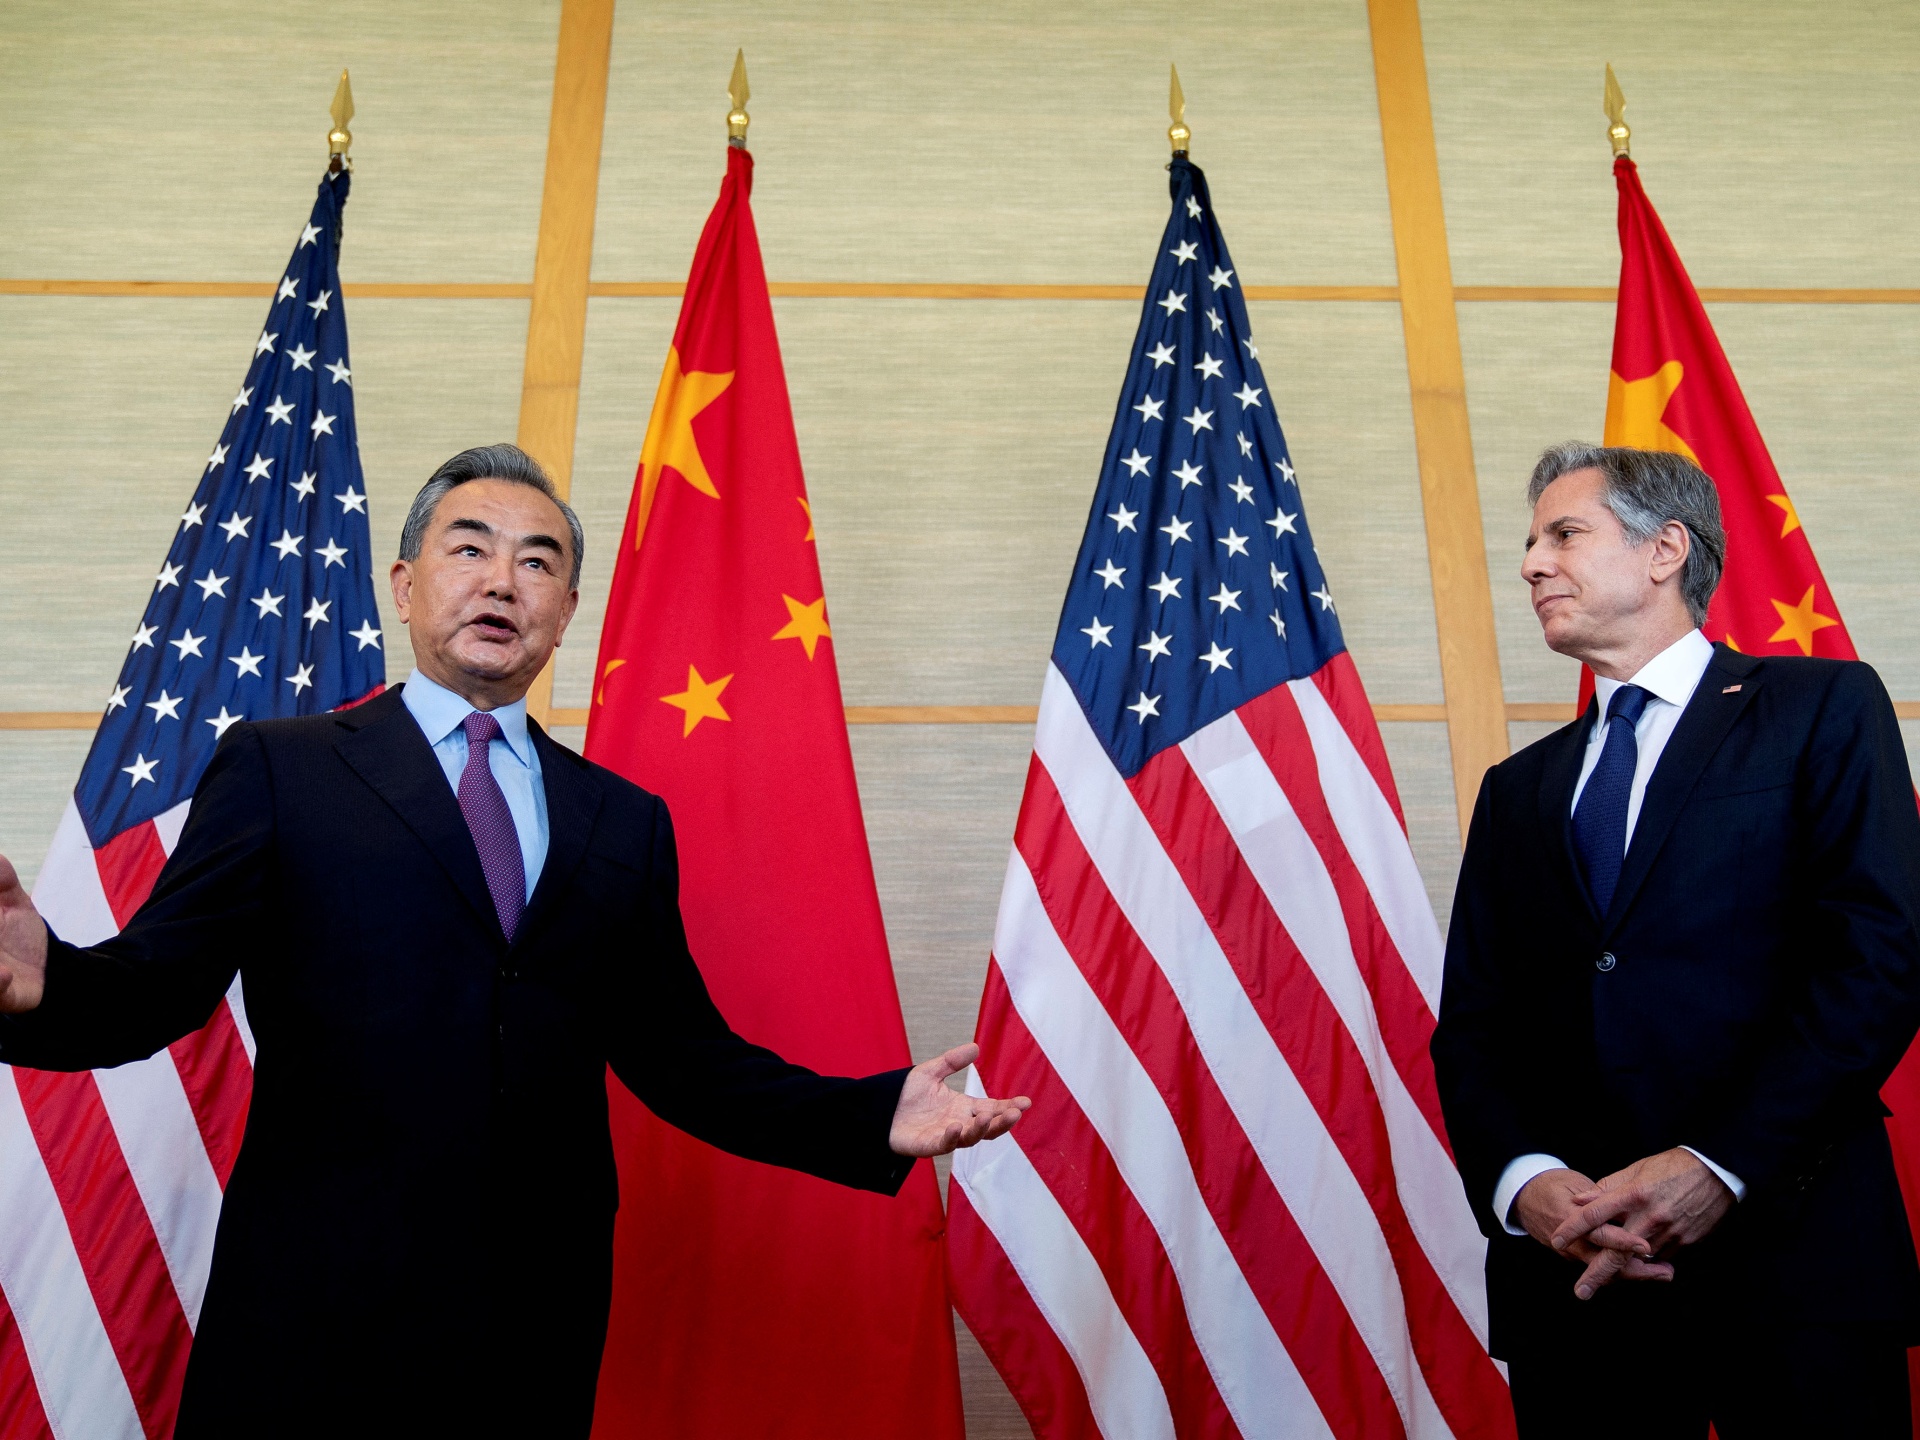 China Warns US Before Blinken Meeting About Military Aid to Russia - Will Consequences Follow? 18